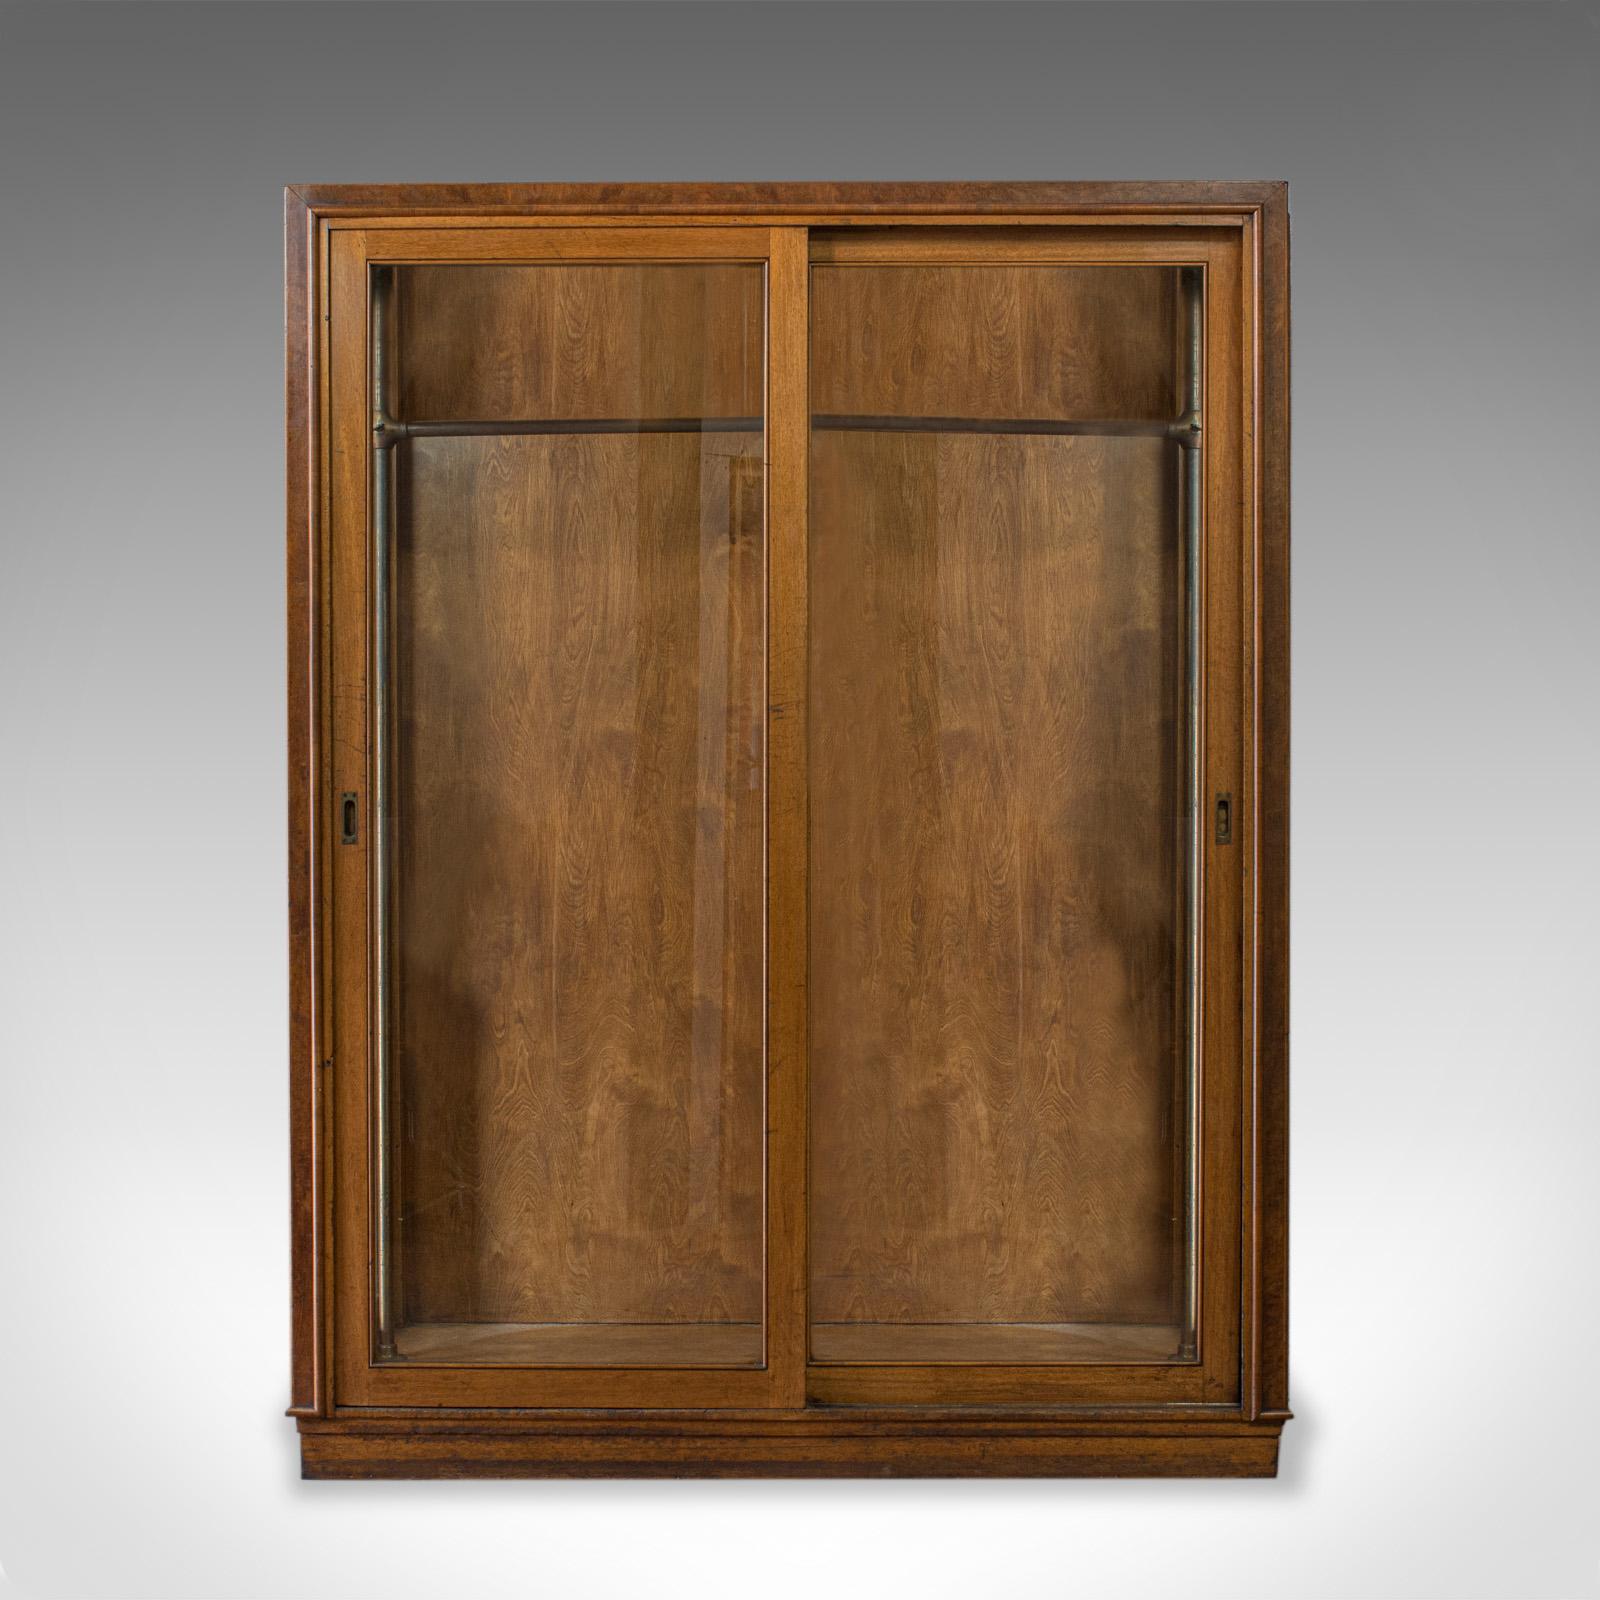 This is a substantial antique glazed wardrobe cabinet. An English, oak retail, display shop fitting cabinet by aircraft and store planning specialists George Parnall and Co, and dating to the late 19th century, circa 1900.

Select oak and burr